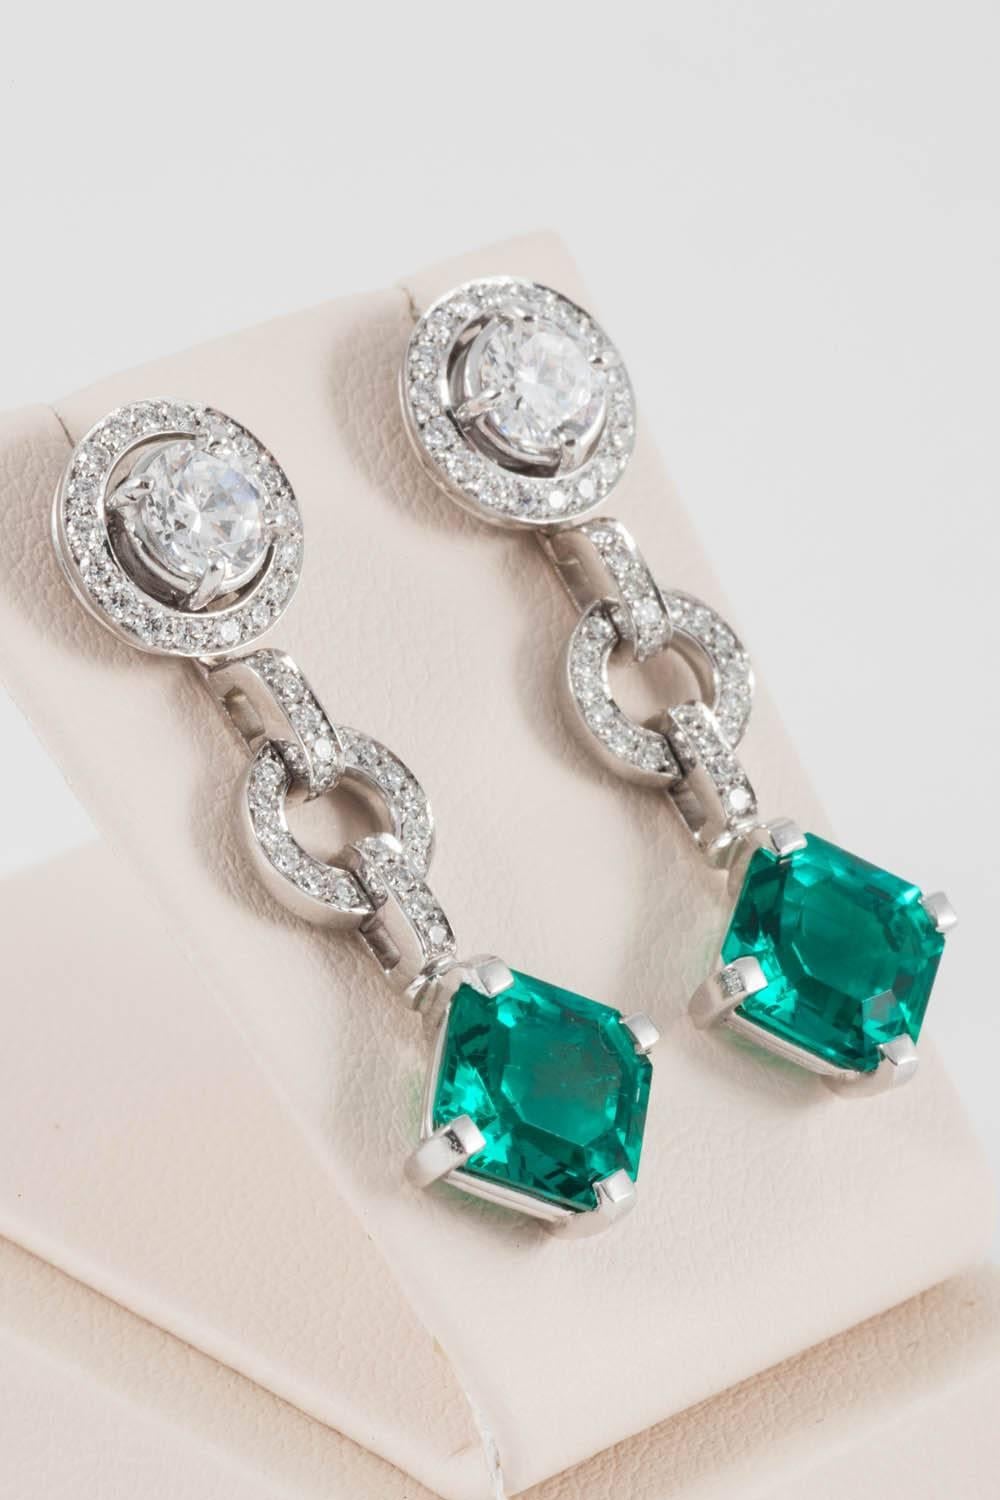 These beautiful earrings are able to be worn in three different ways.
The earrings can be worn as a whole:
or as single pair of diamond studs
or as single pair of diamond studs with the halo for amore dressy occasion.
Thus, giving possibly the most